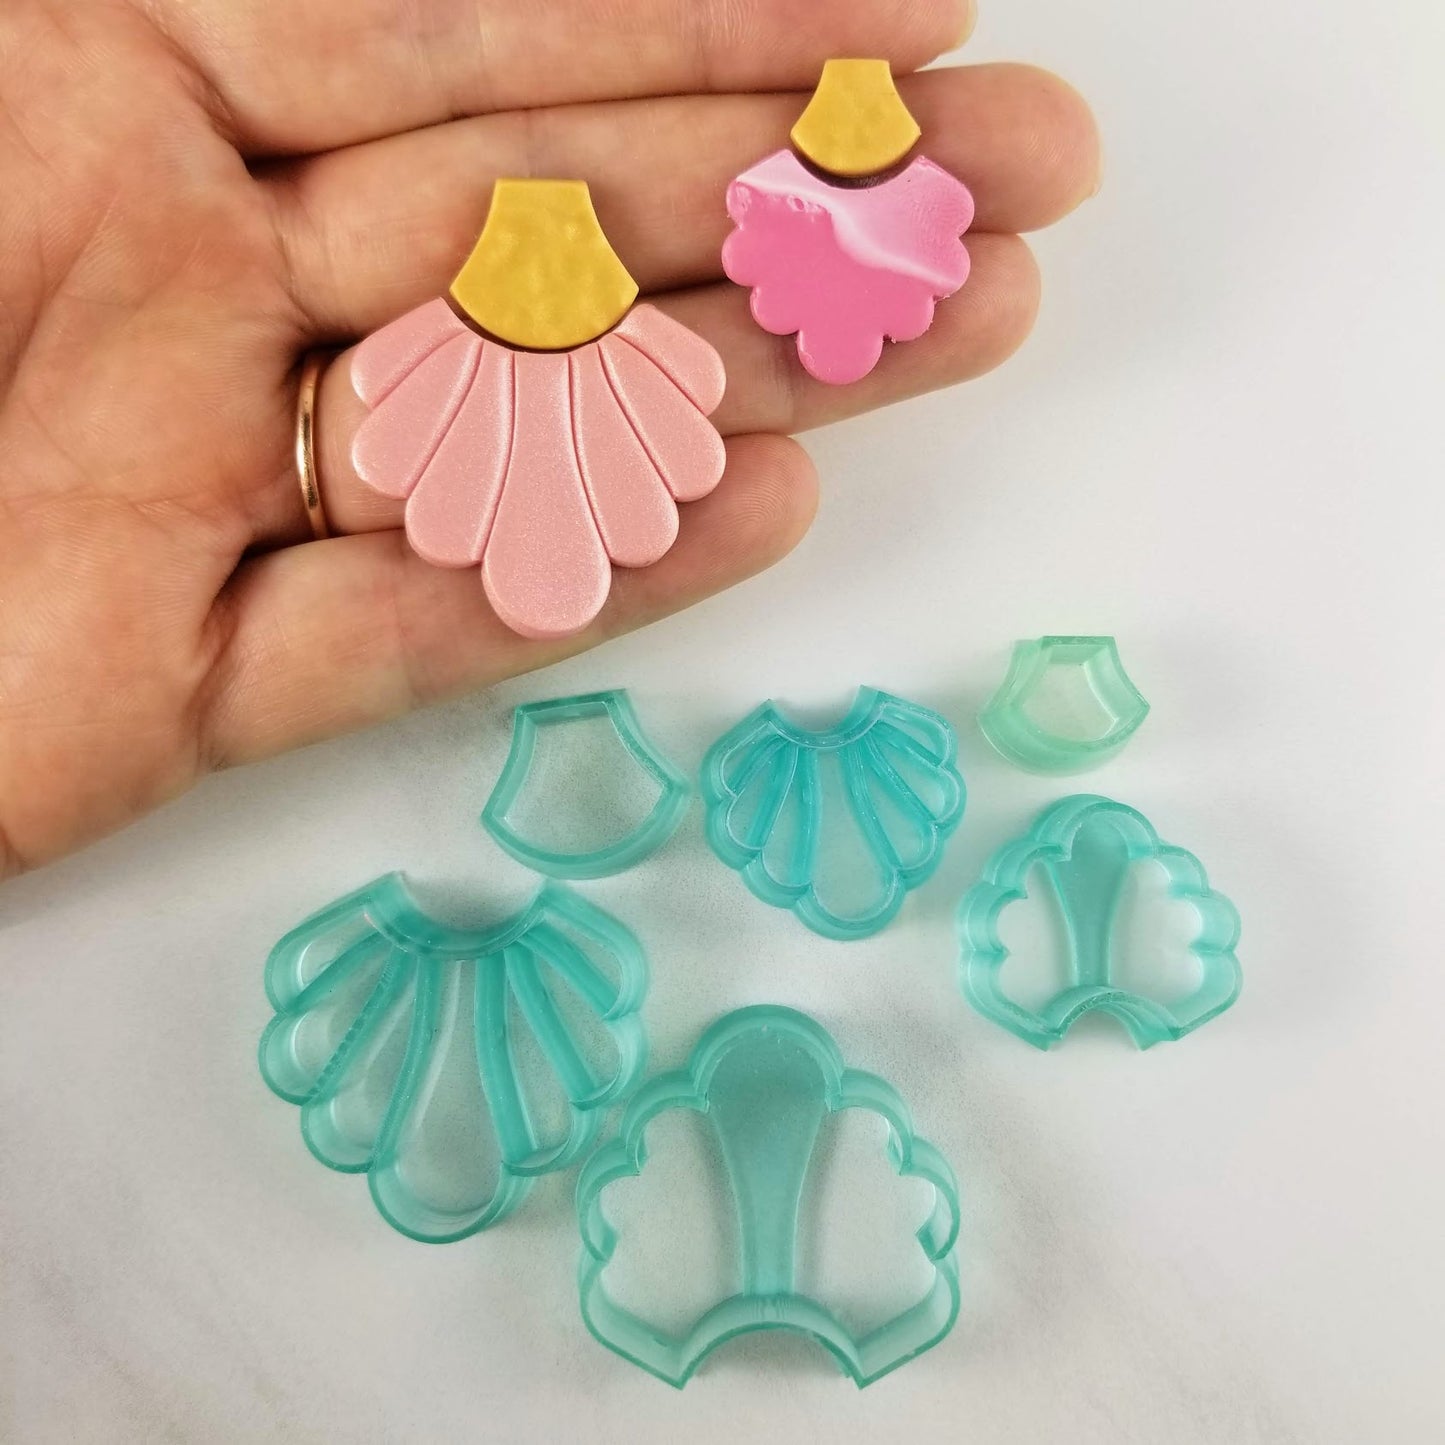 The Art deco flower polymer clay cutter set comes in two styles, debossing and outline cutter. It also comes in different sizes, 3 centimeters and 2 centimeters. Comparison in photo